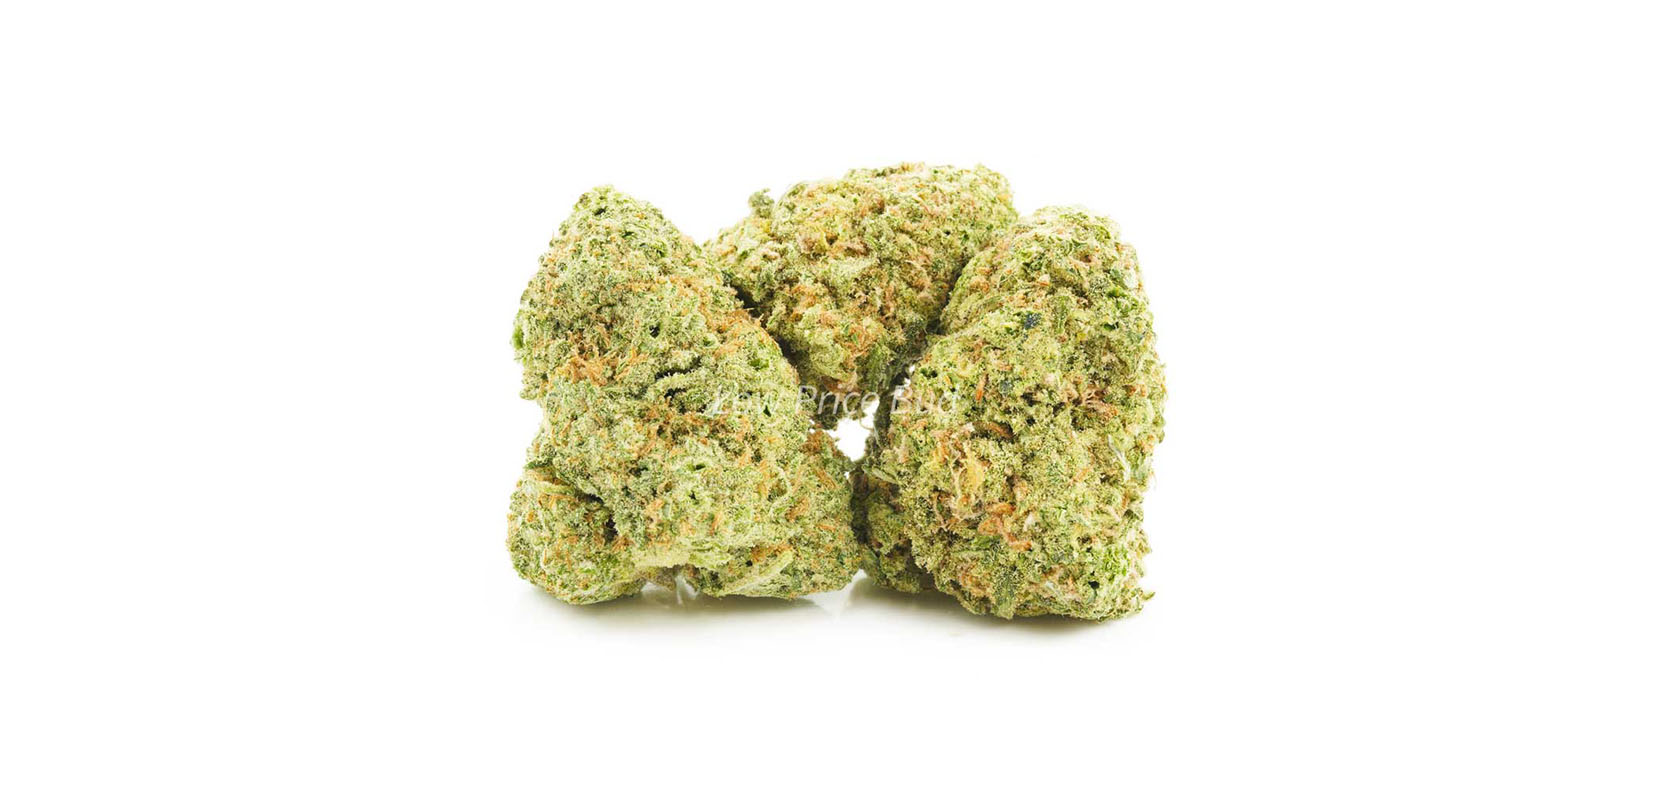 Girl Scout Cookies budget buds from online weed dispensary Low Price Bud. bc online dispensary. cheapest weed online canada. order weed canada.